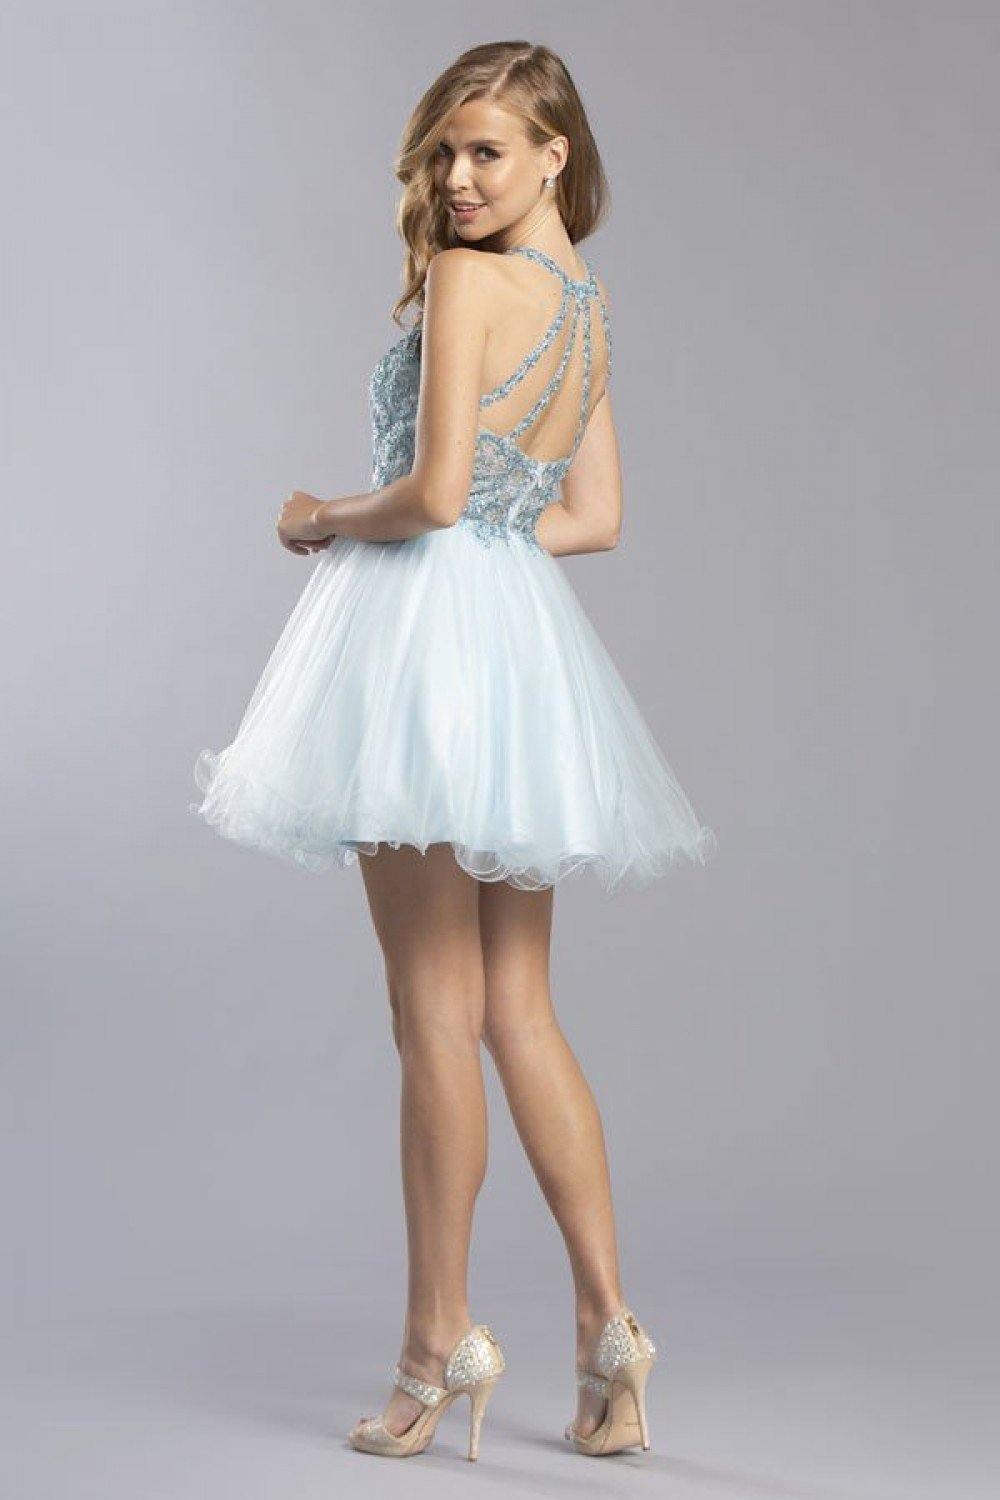 Homecoming Short A-Line Dress - The Dress Outlet ASpeed